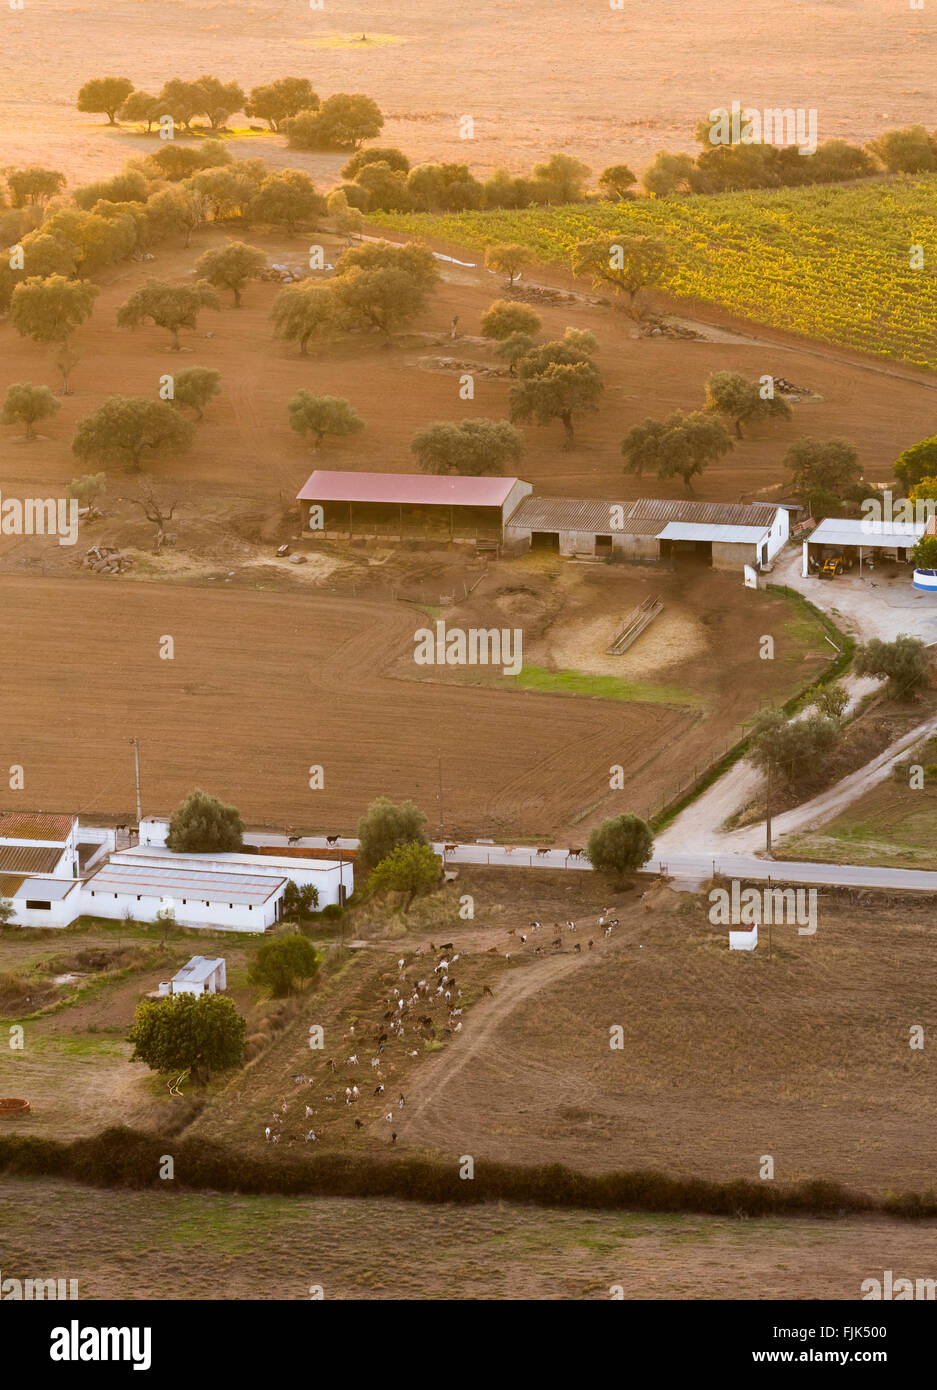 Aerial view of livestock, fields and agricultural buildings on a farm in the Alentejo region, Portugal Stock Photo